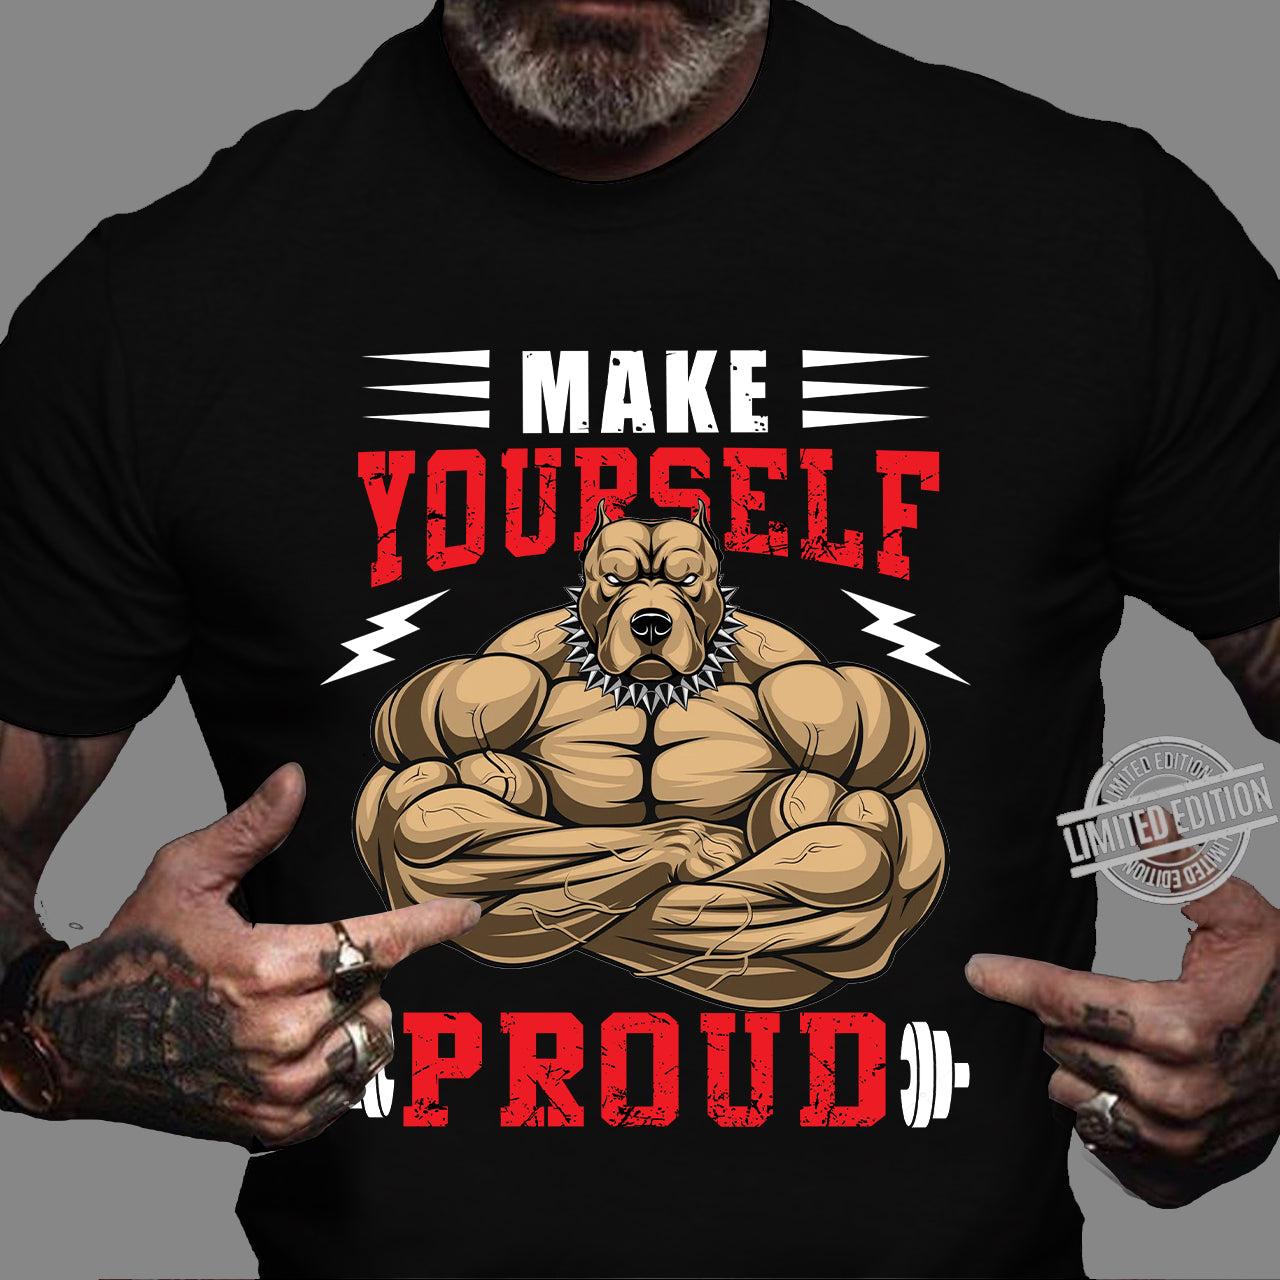 at klemme nationalisme morbiditet Gym Men T-shirts Bodybuilding Shirts Muscle Strong Pitbull Motivational  Quotes Saying – Style My Pride